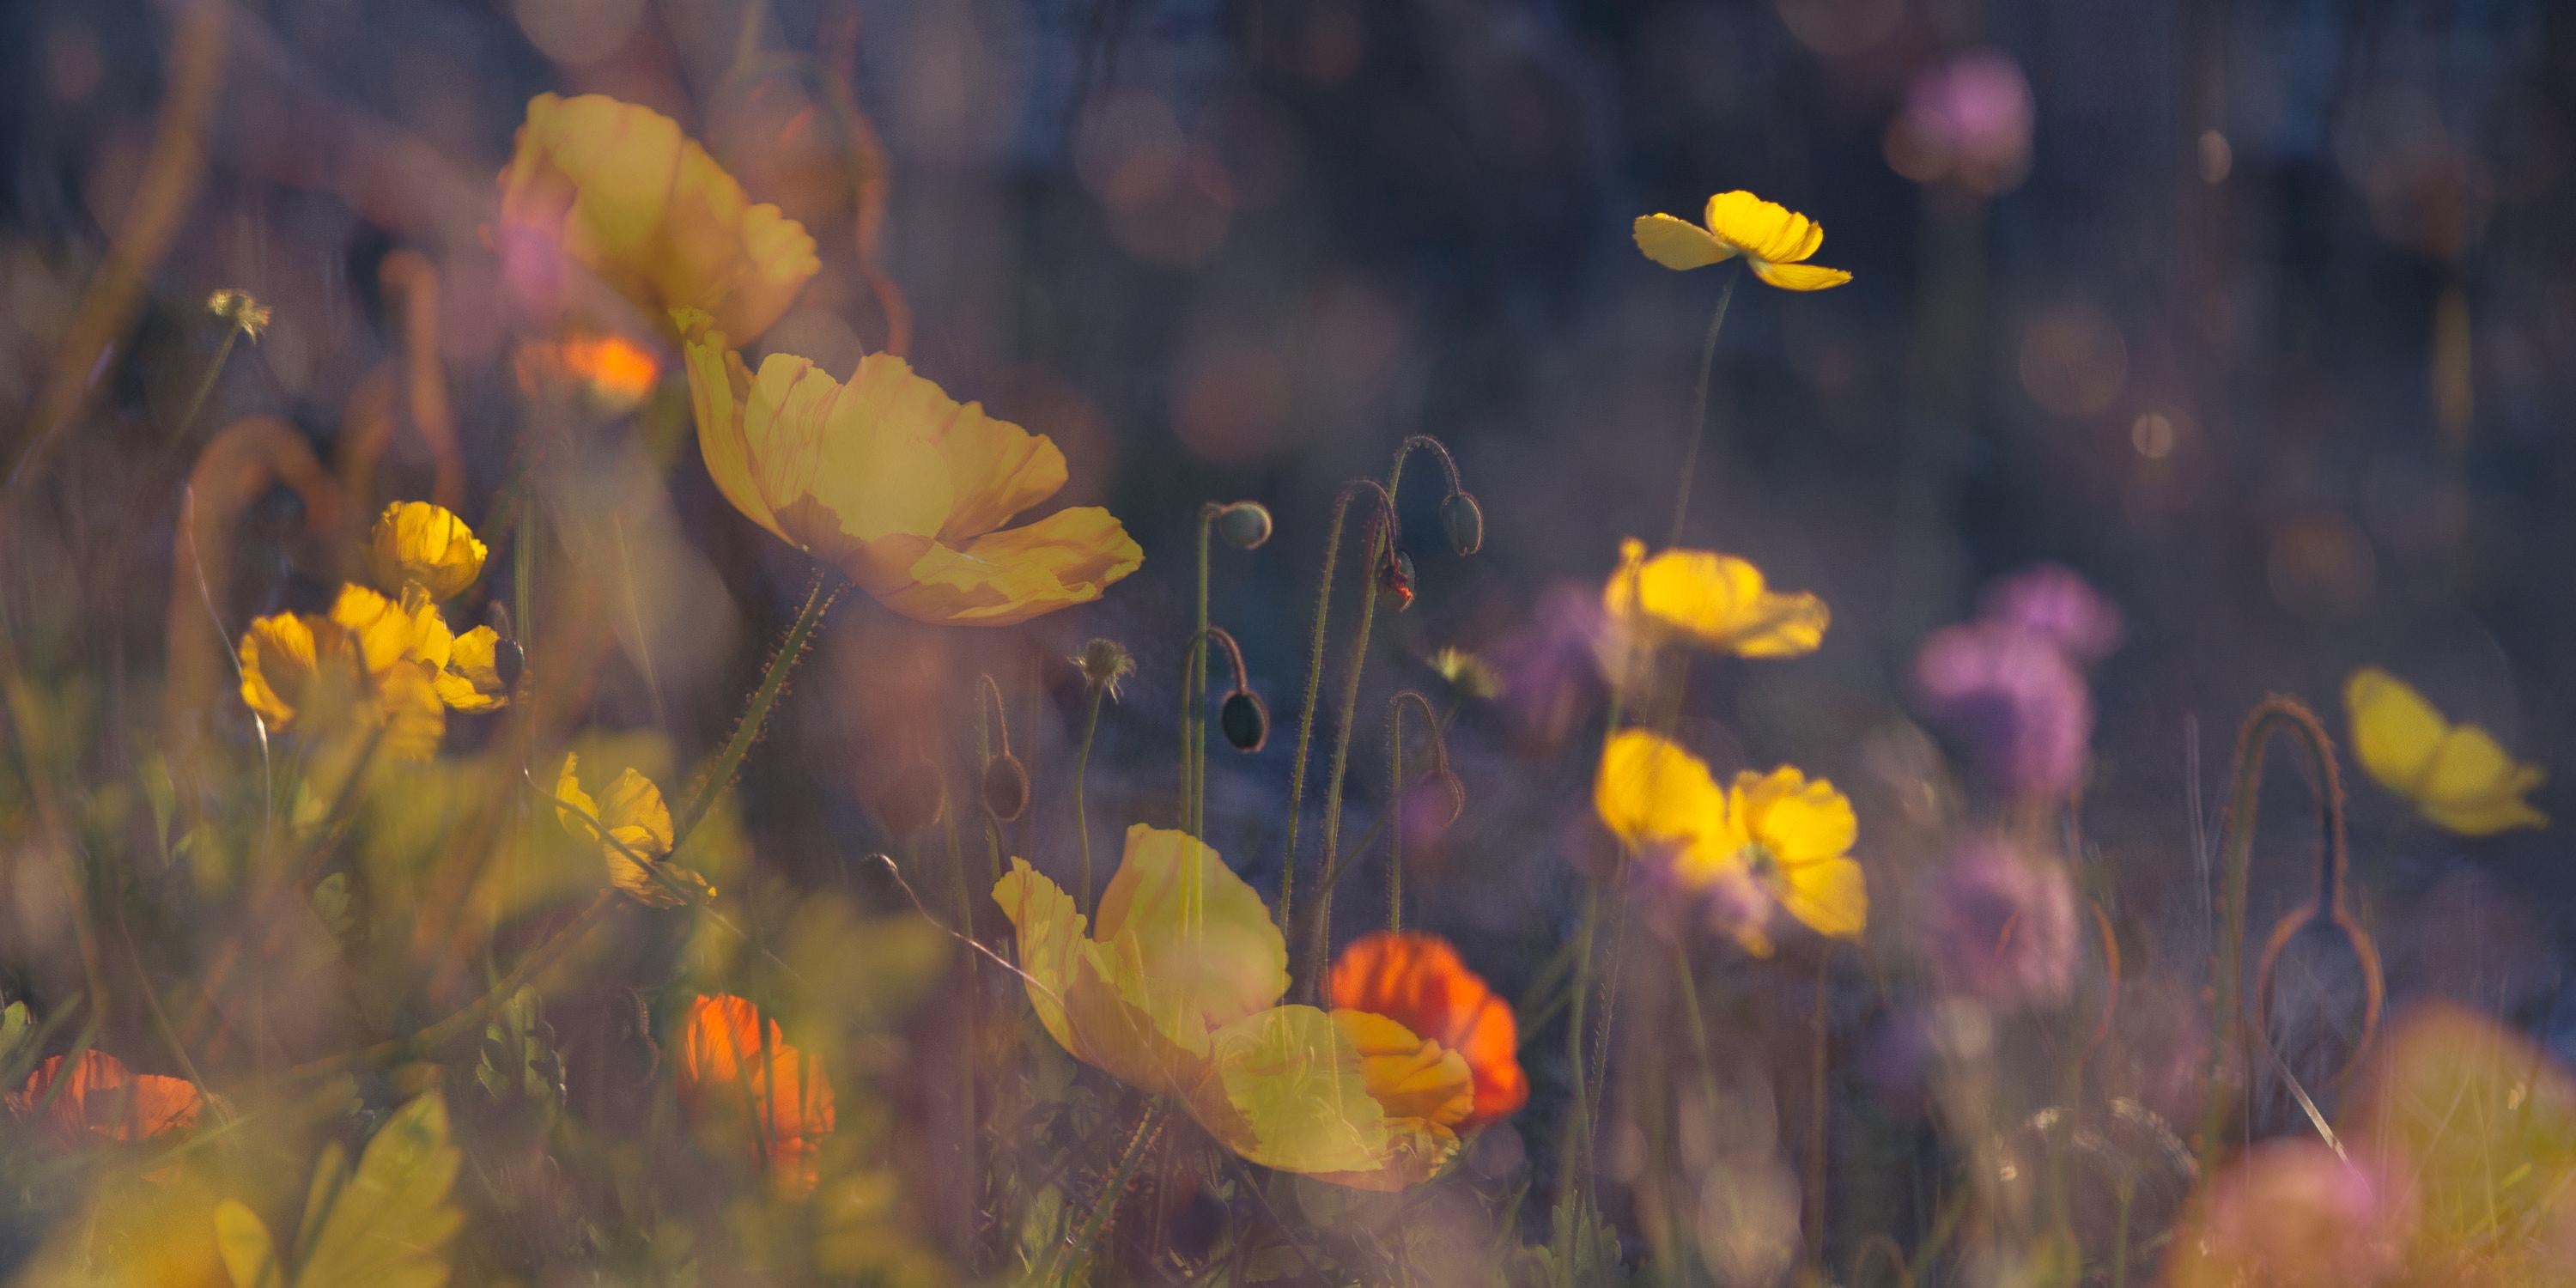 Sophia Milligan Color Photograph - 'Evening Poppies' Large scale floral photo panorama. Botanical yellow pink